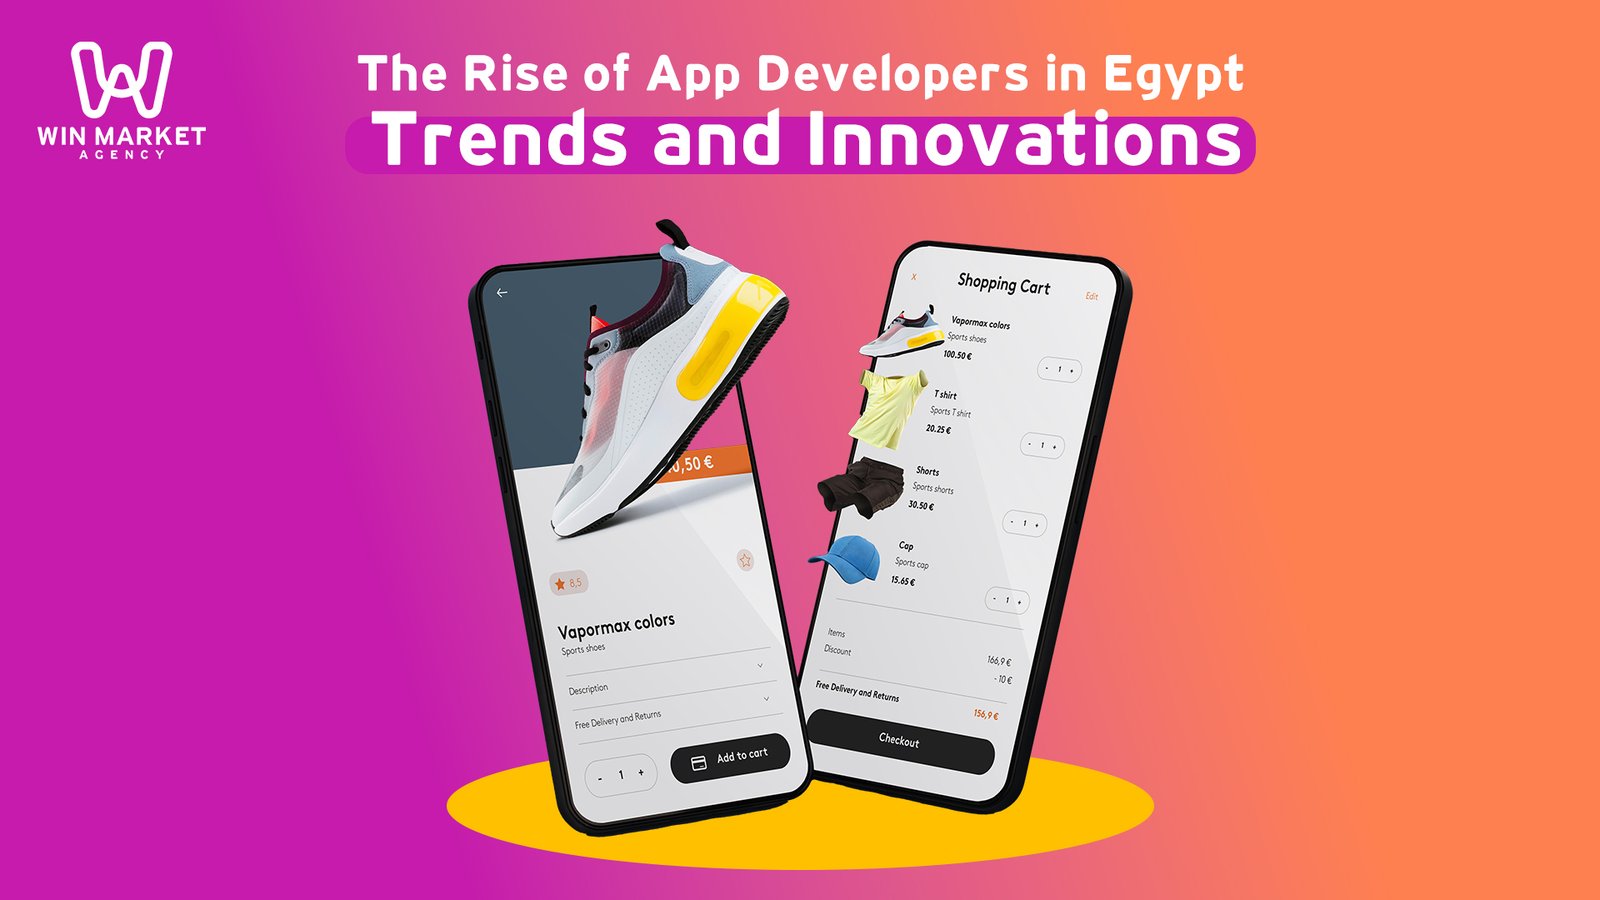 The Rise of App Developers in Egypt: Trends and Innovations